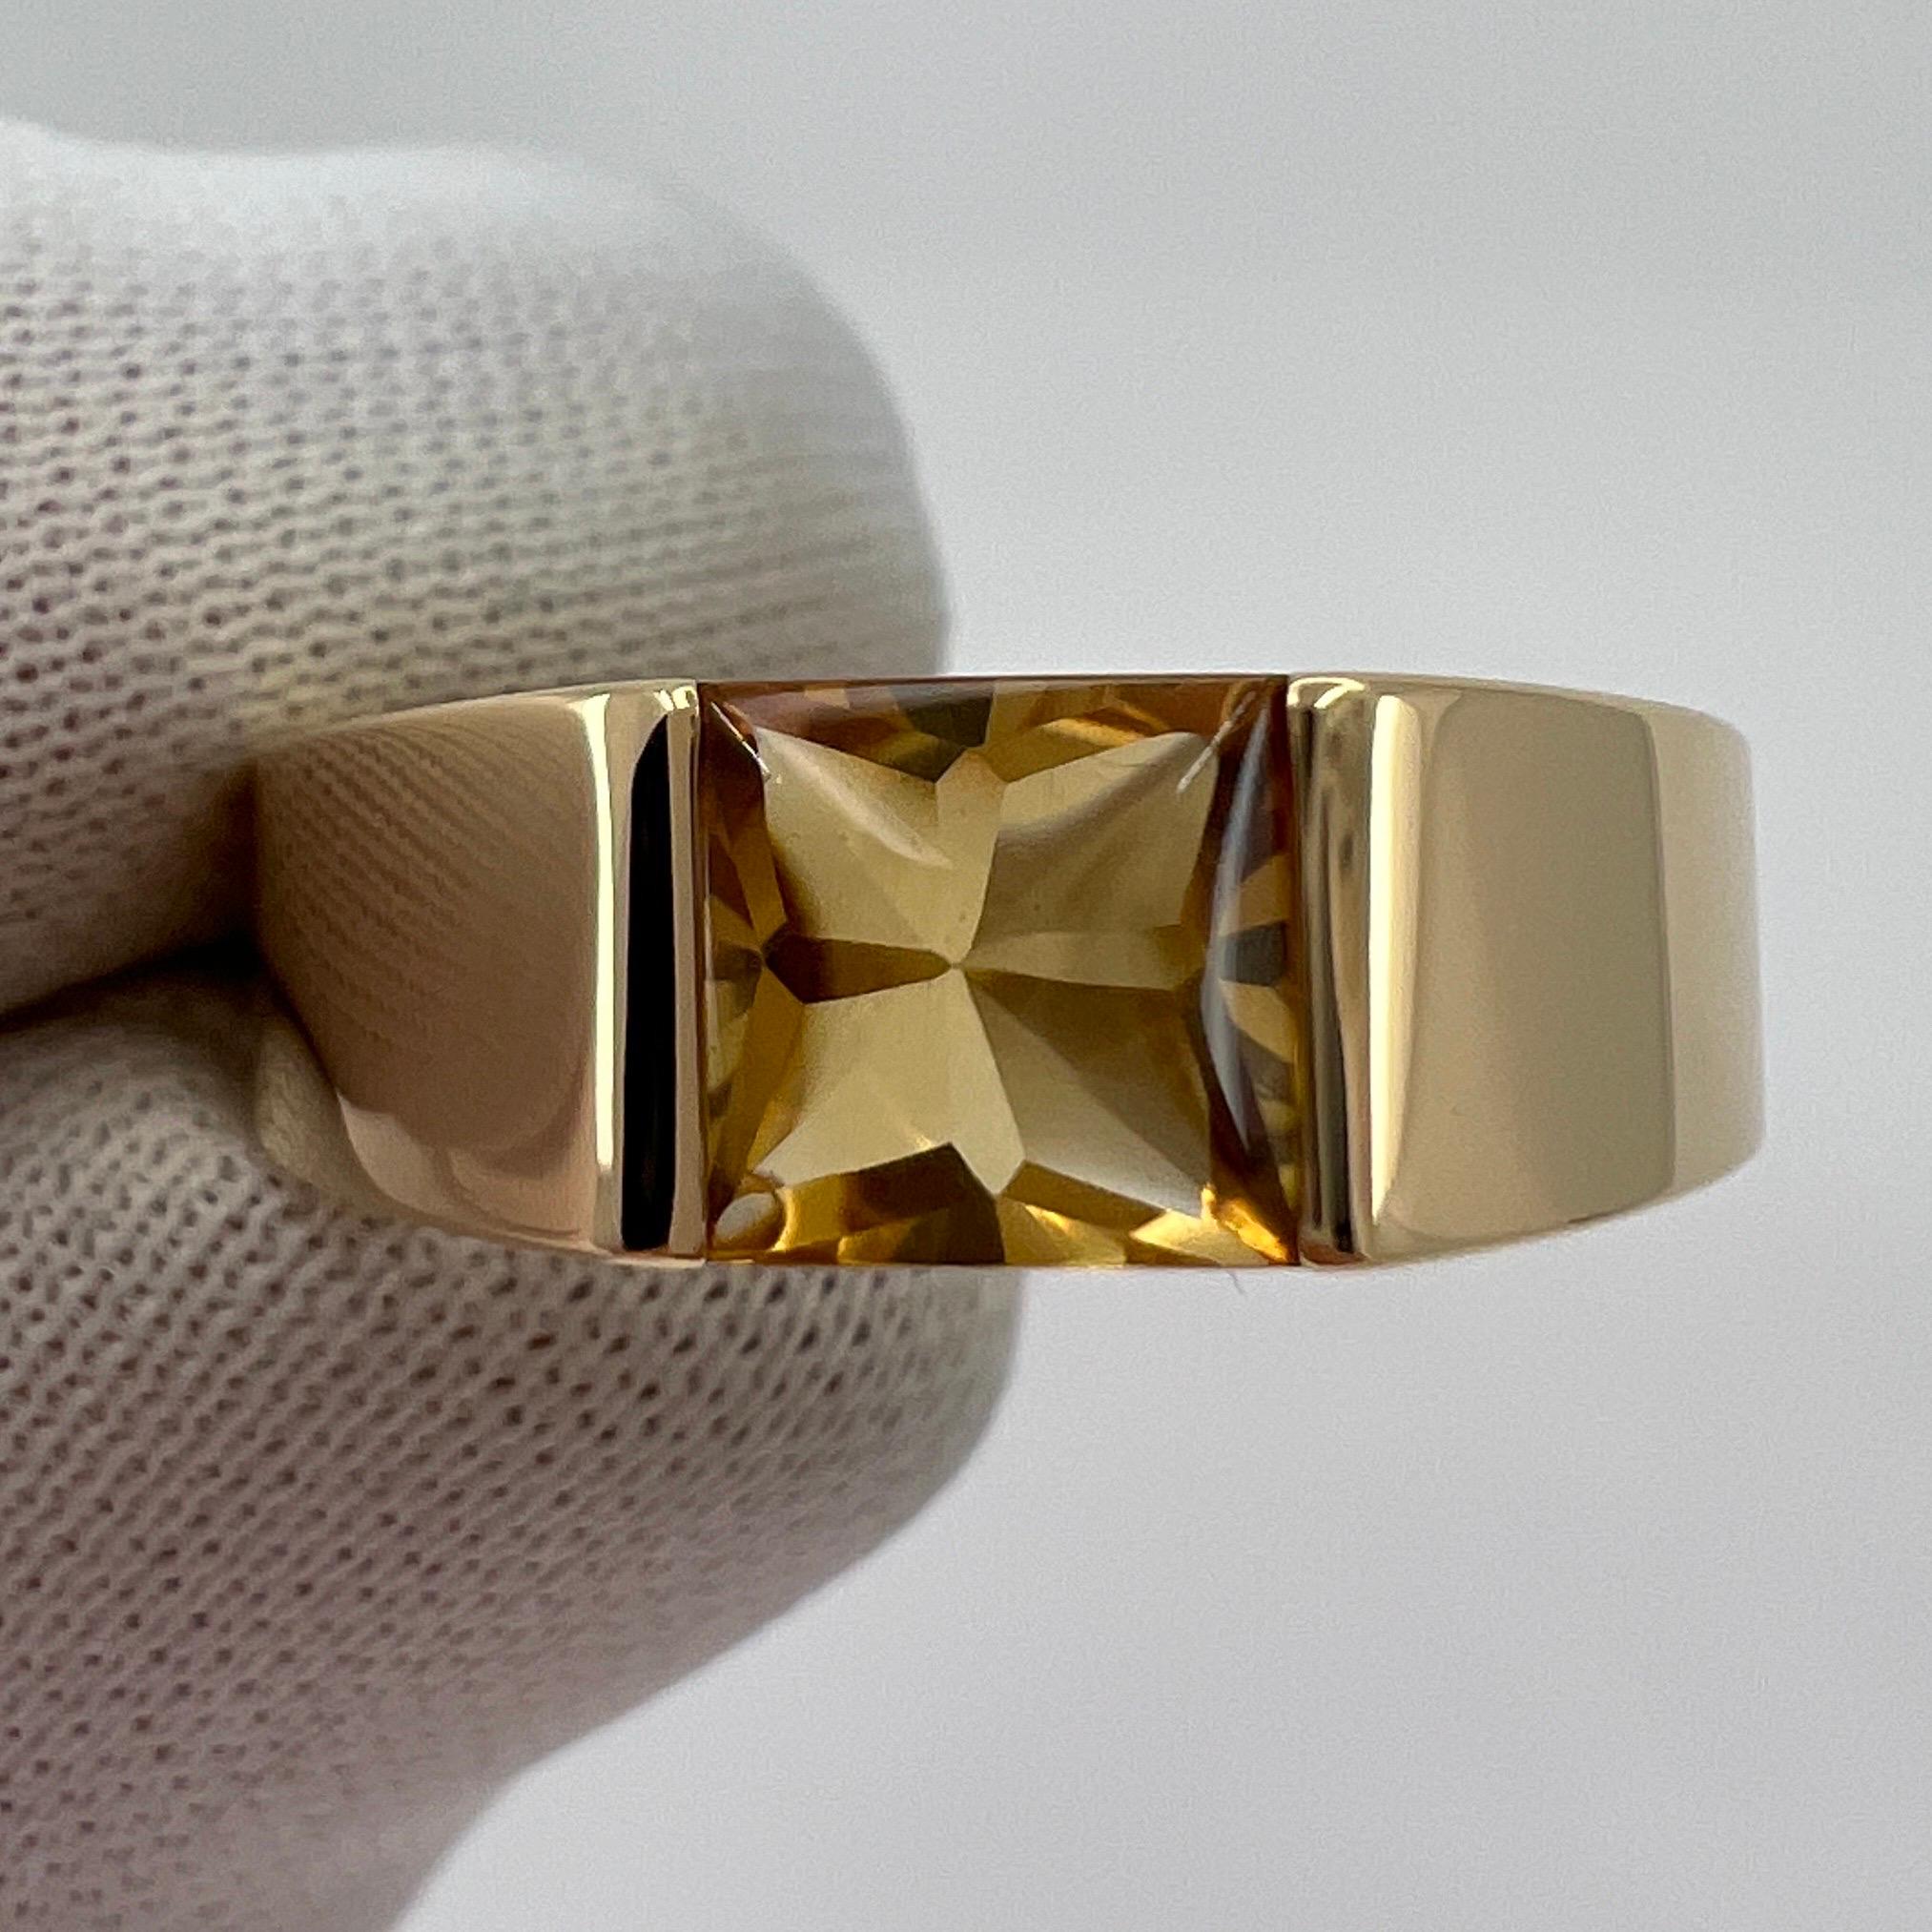 Cartier Vivid Yellow Citrine 18k Yellow Gold Tank Ring.

Stunning yellow gold ring with a 6mm tension set vivid yellow citrine. Fine jewellery houses like Cartier only use the finest of gemstones and this citrine is no exception. A top grade peridot